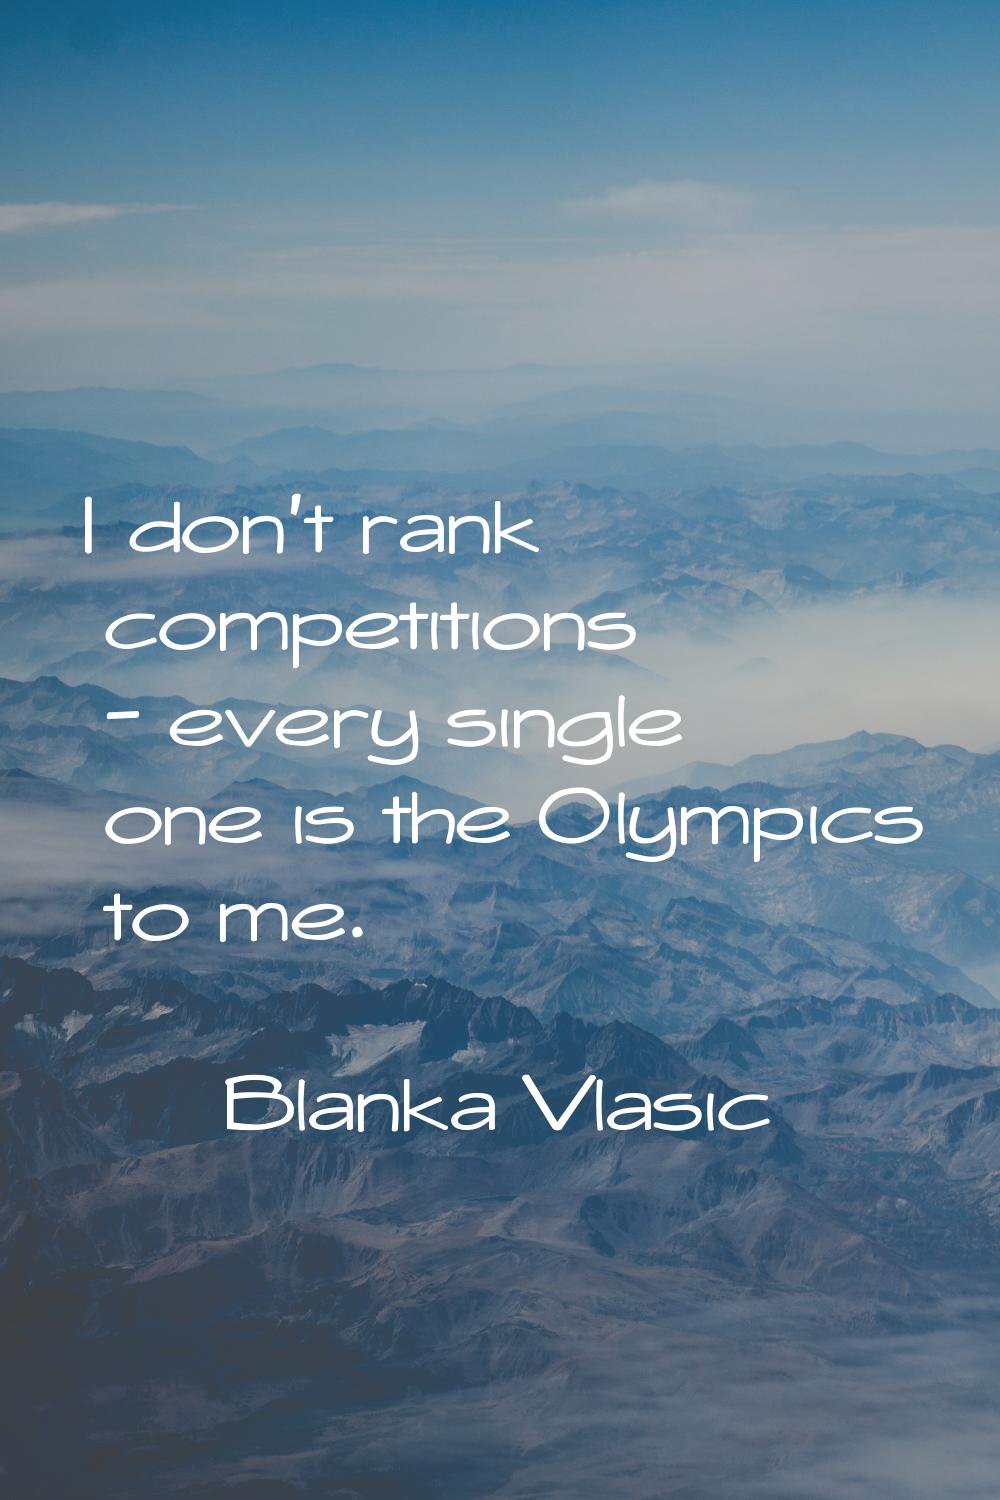 I don't rank competitions - every single one is the Olympics to me.